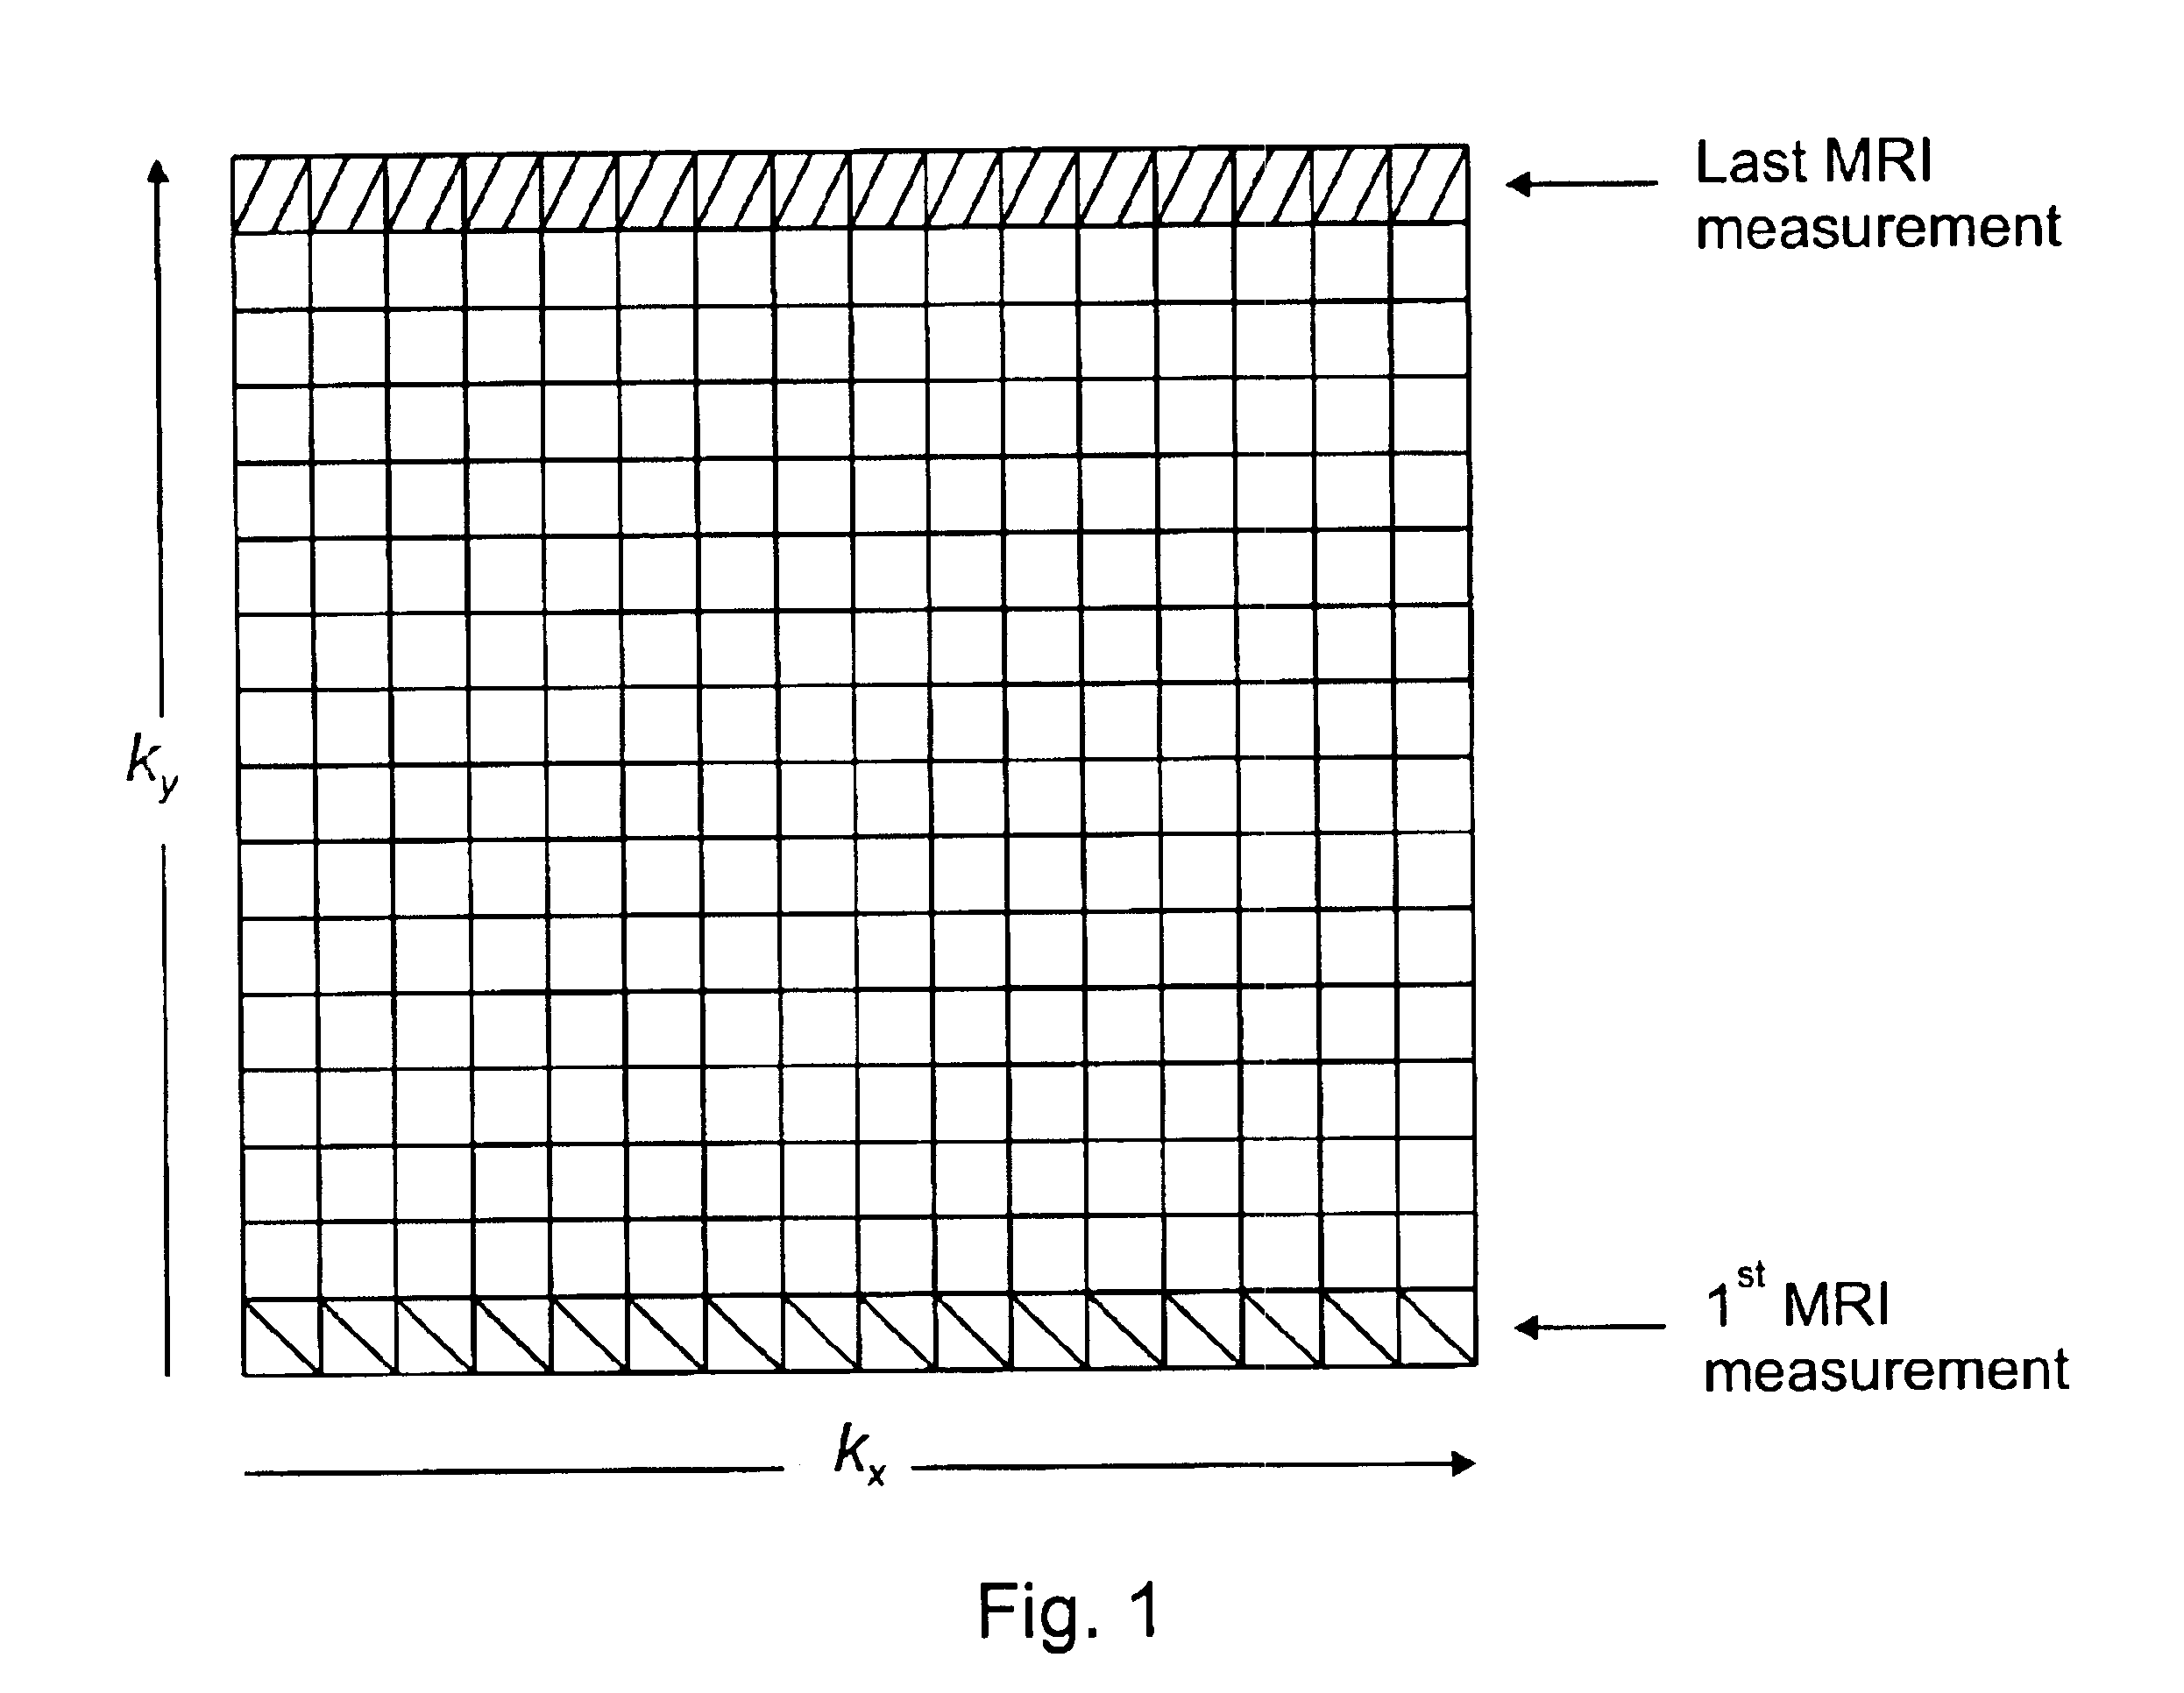 Method and device for correcting organ motion artifacts in MRI systems